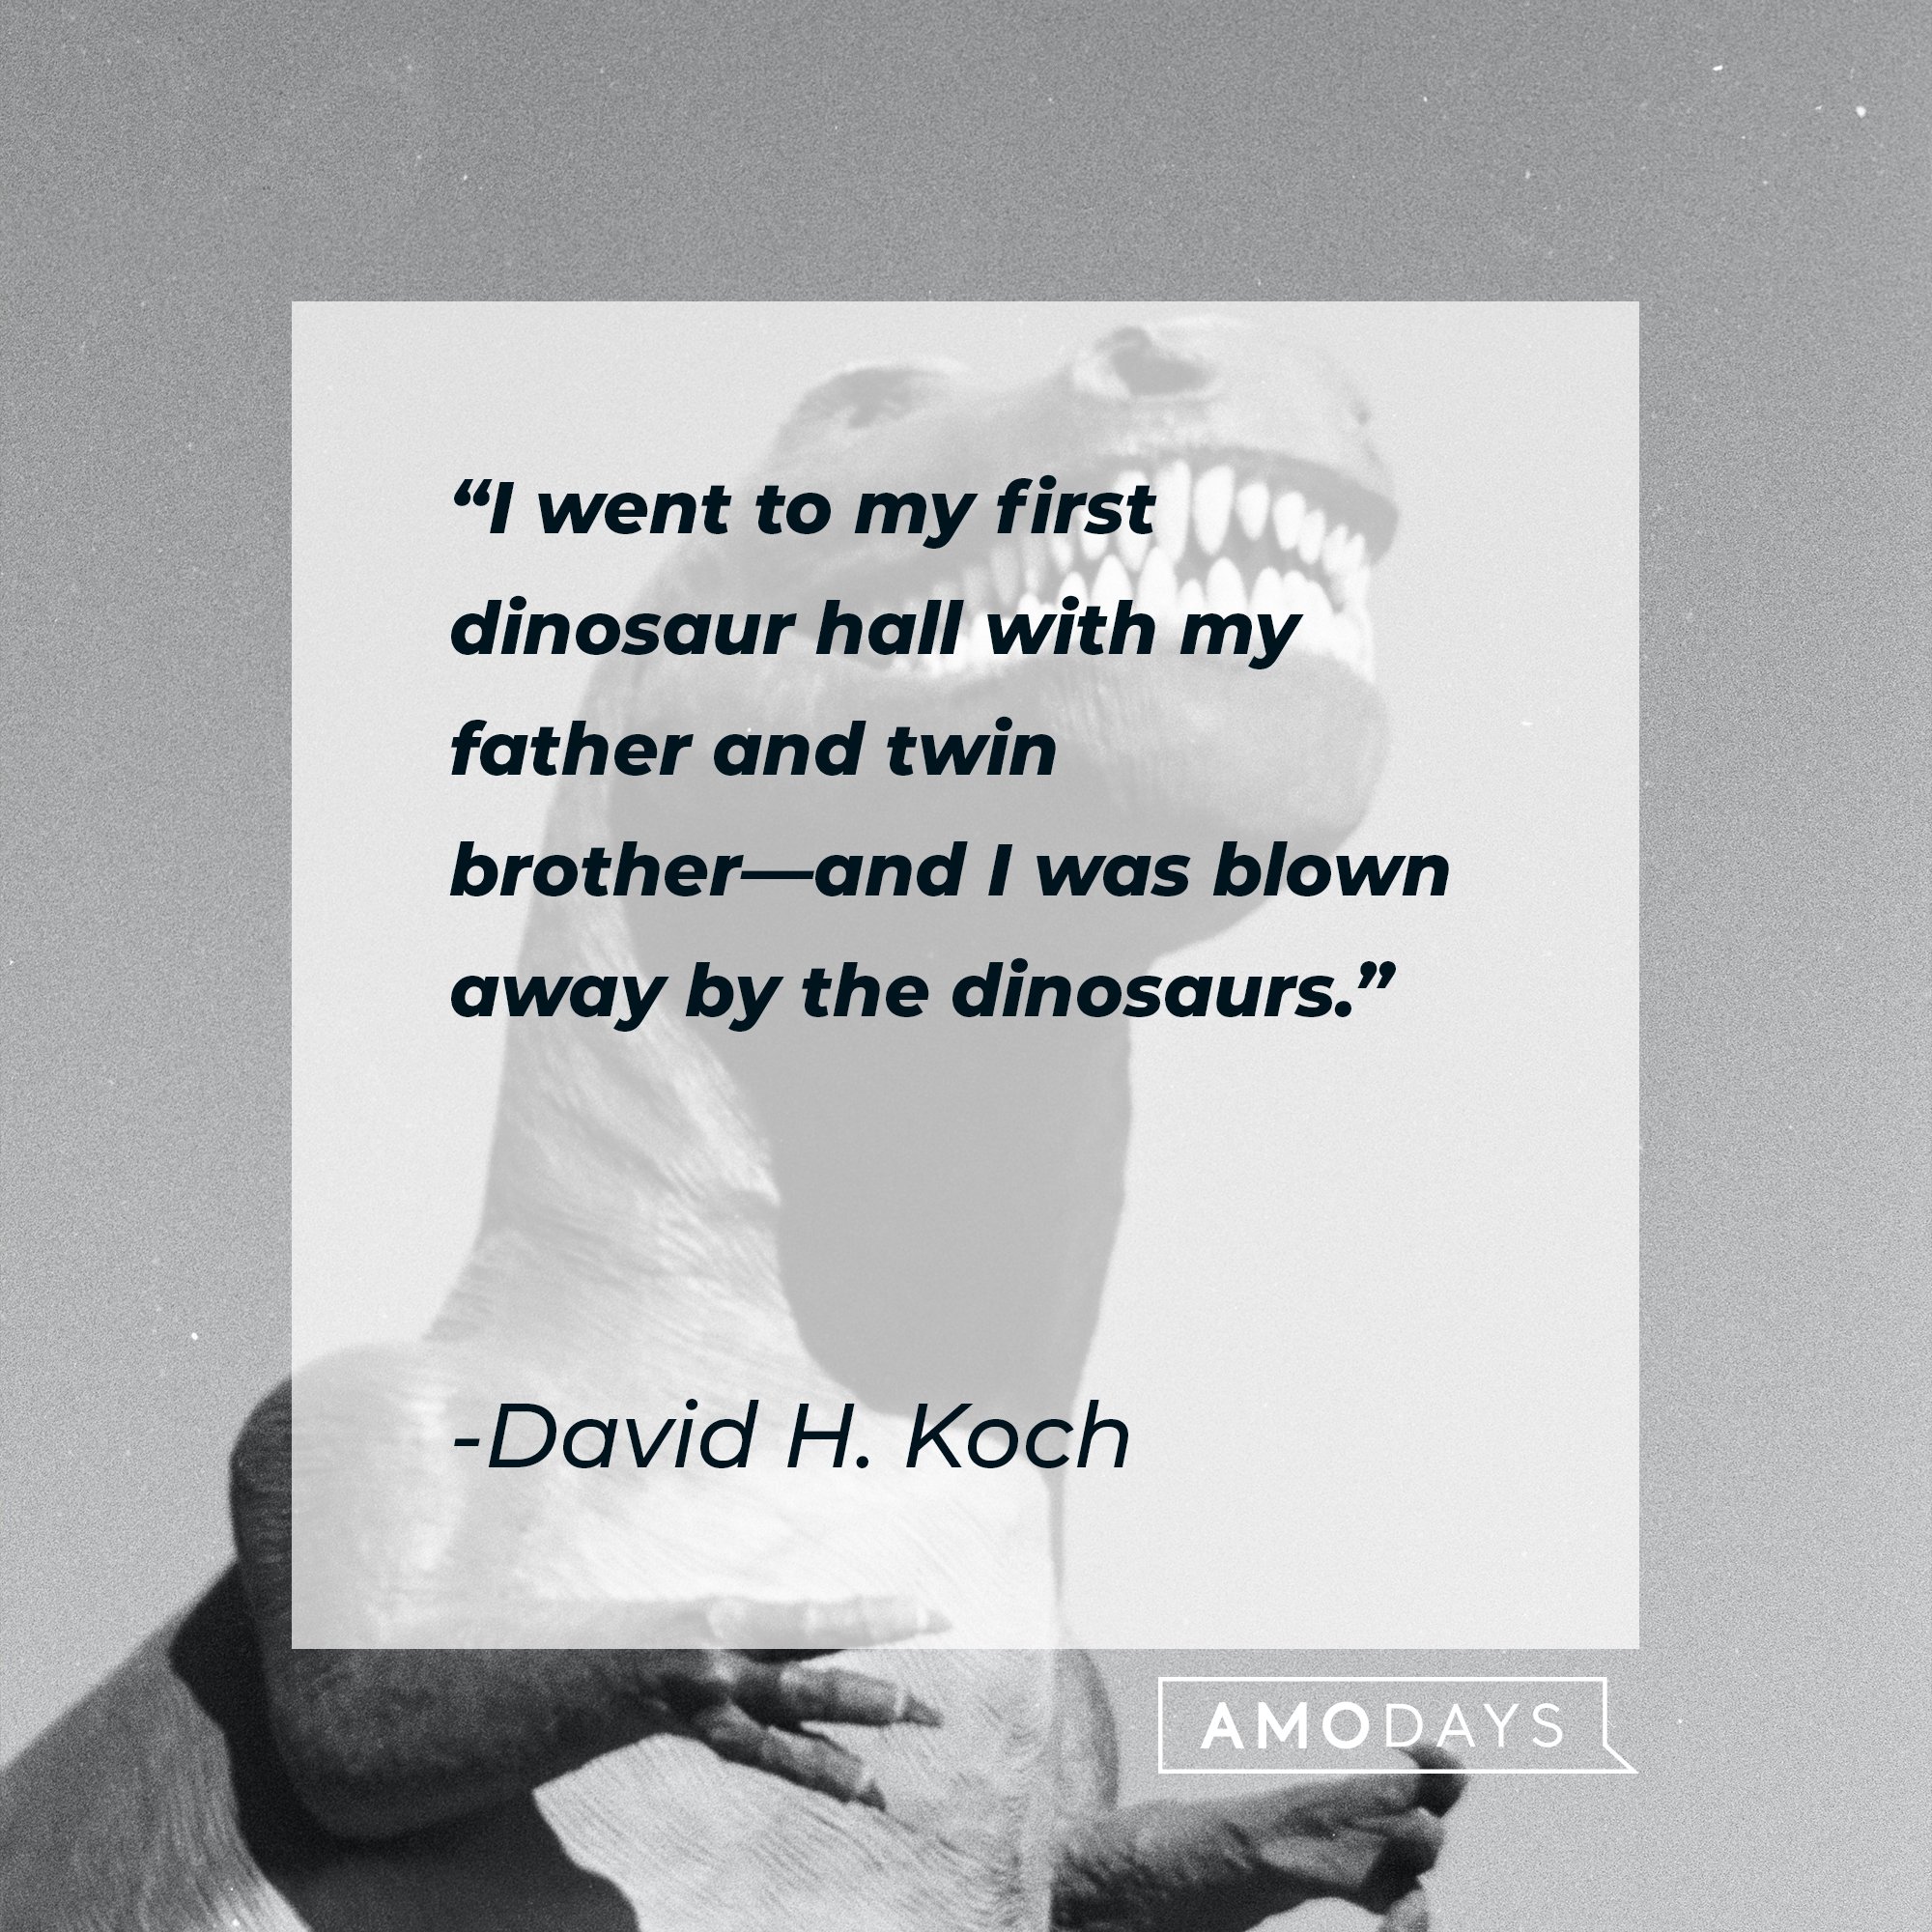 David H. Koch’s quote: "I went to my first dinosaur hall with my father and twin brother―and I was blown away by the dinosaurs." | Image: AmoDays